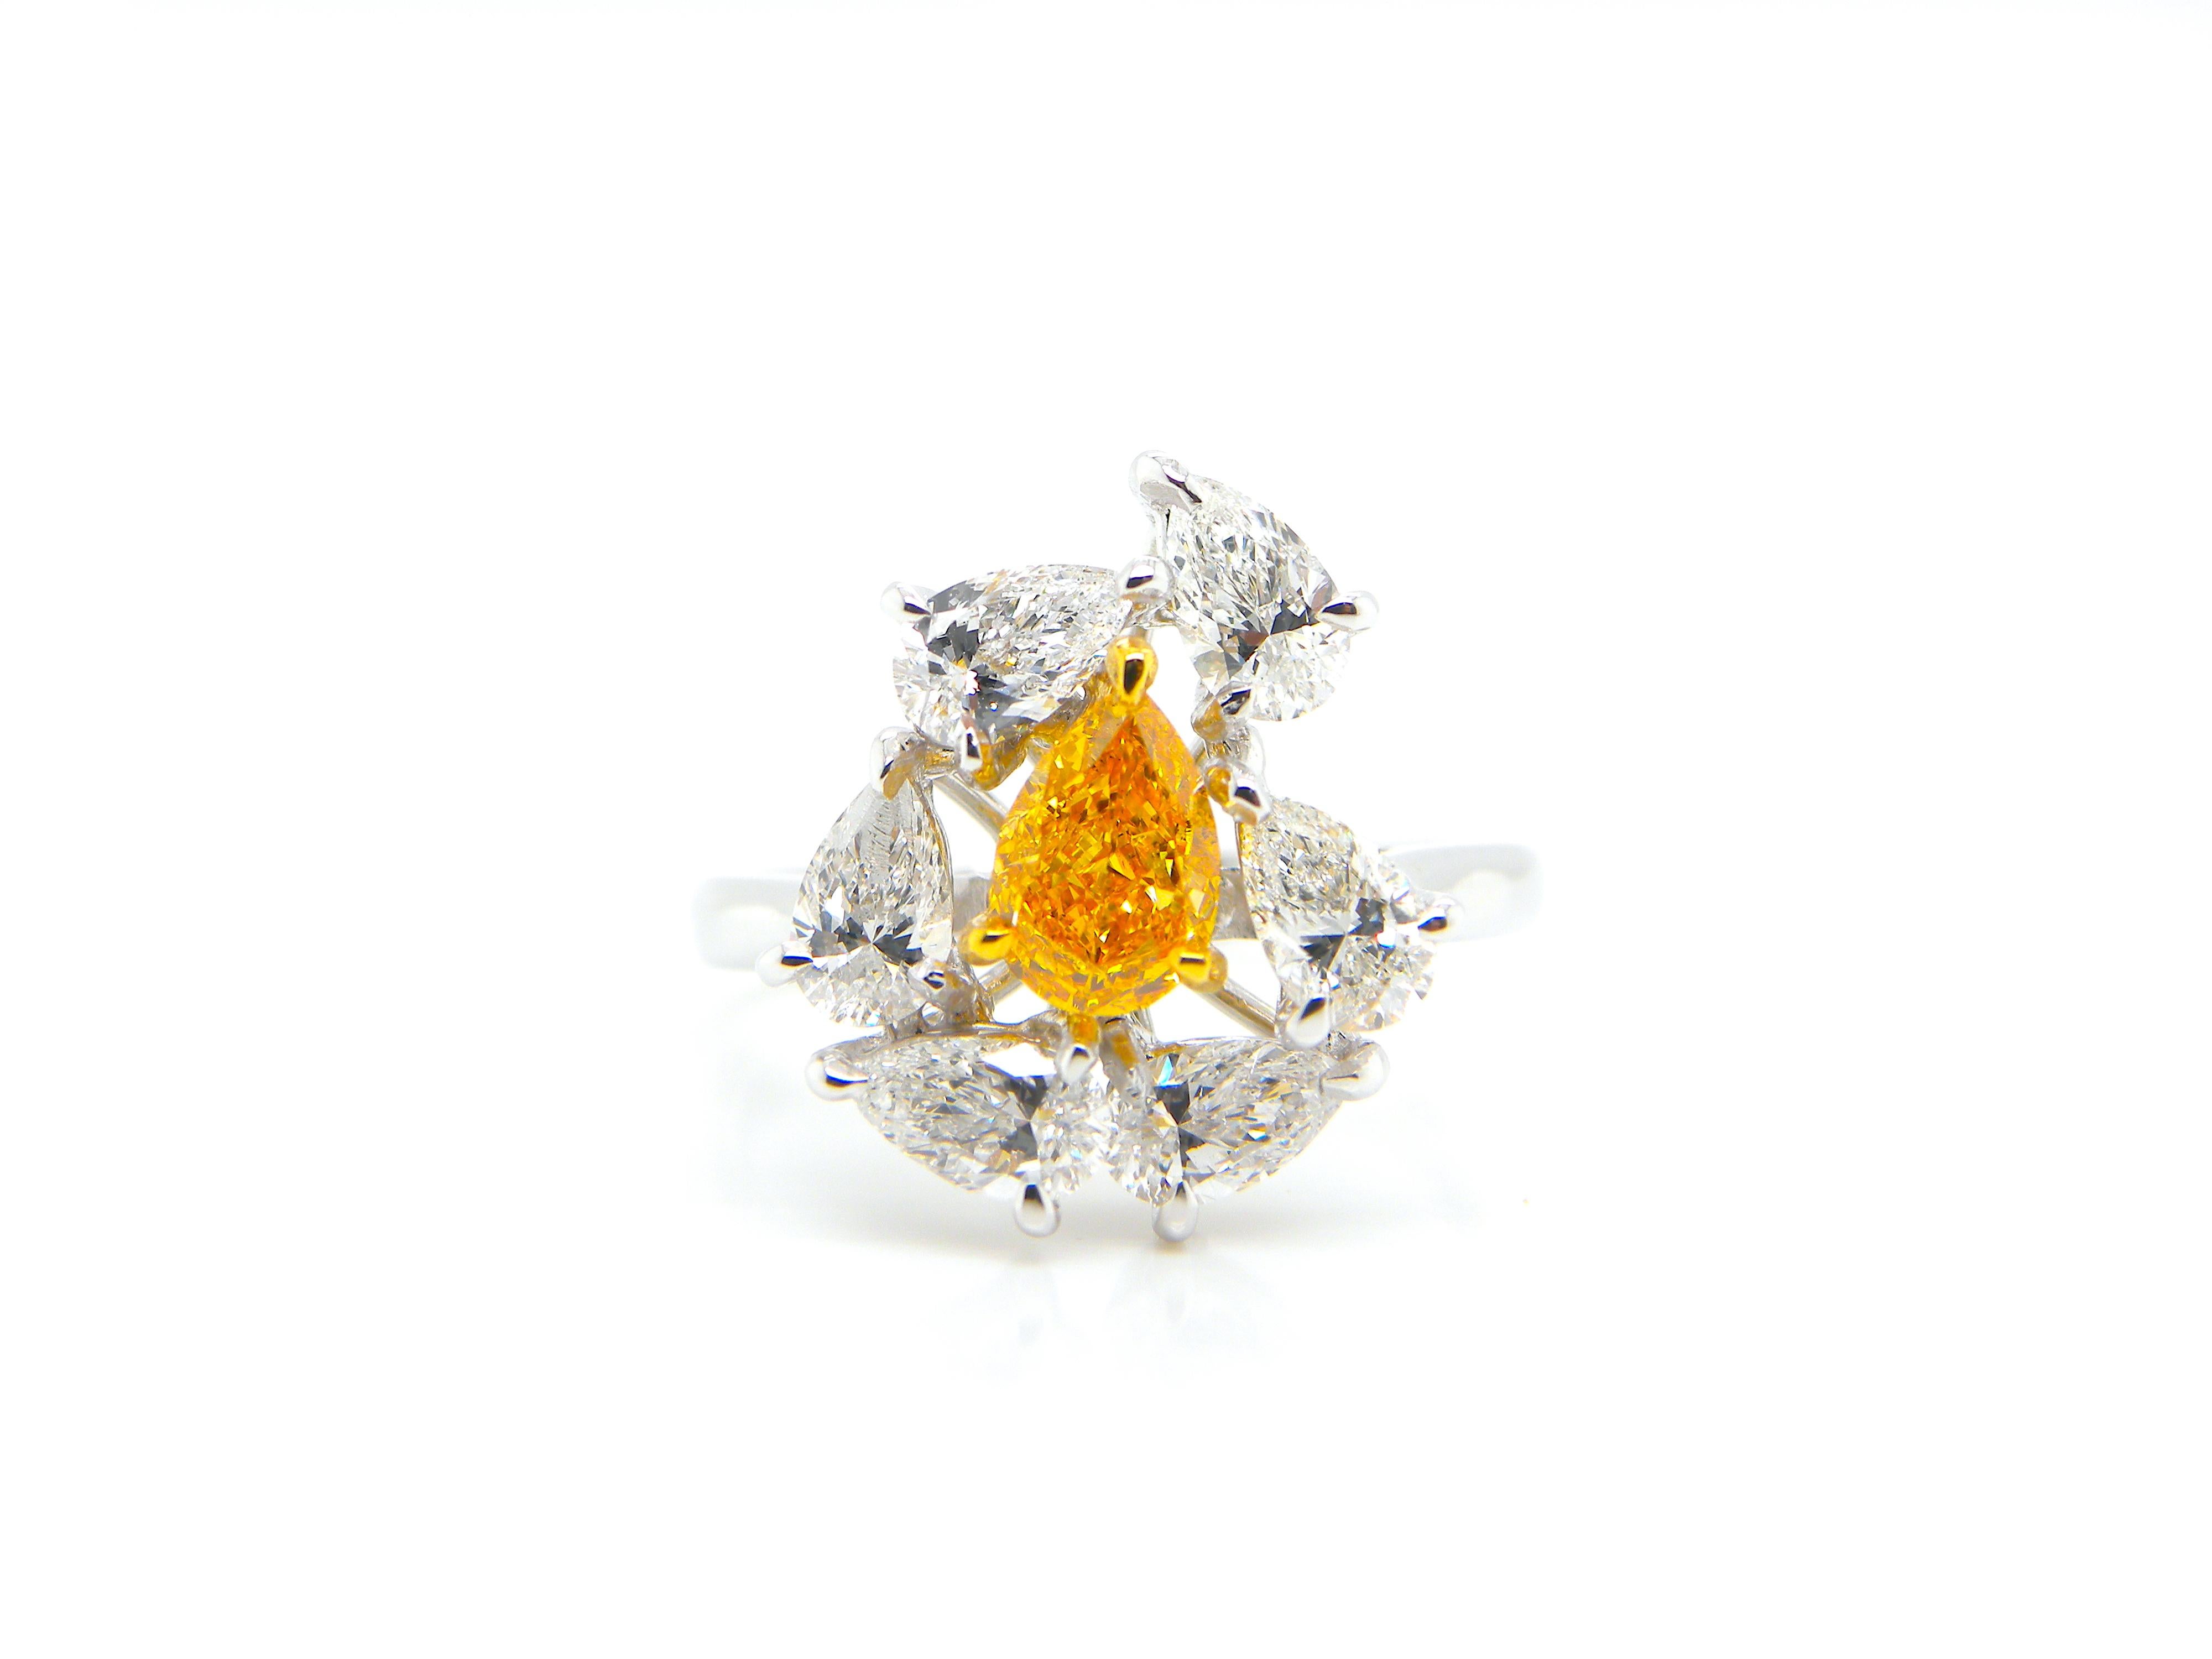 0.67 Carat GIA Certified Fancy Vivid Yellow-Orange Diamond and White Diamond Ring:

An extremely rare jewel, it features a 0.67 carat GIA certified fancy vivid yellow-orange pear-shaped diamond surrounded by a flurry of super-white oval and